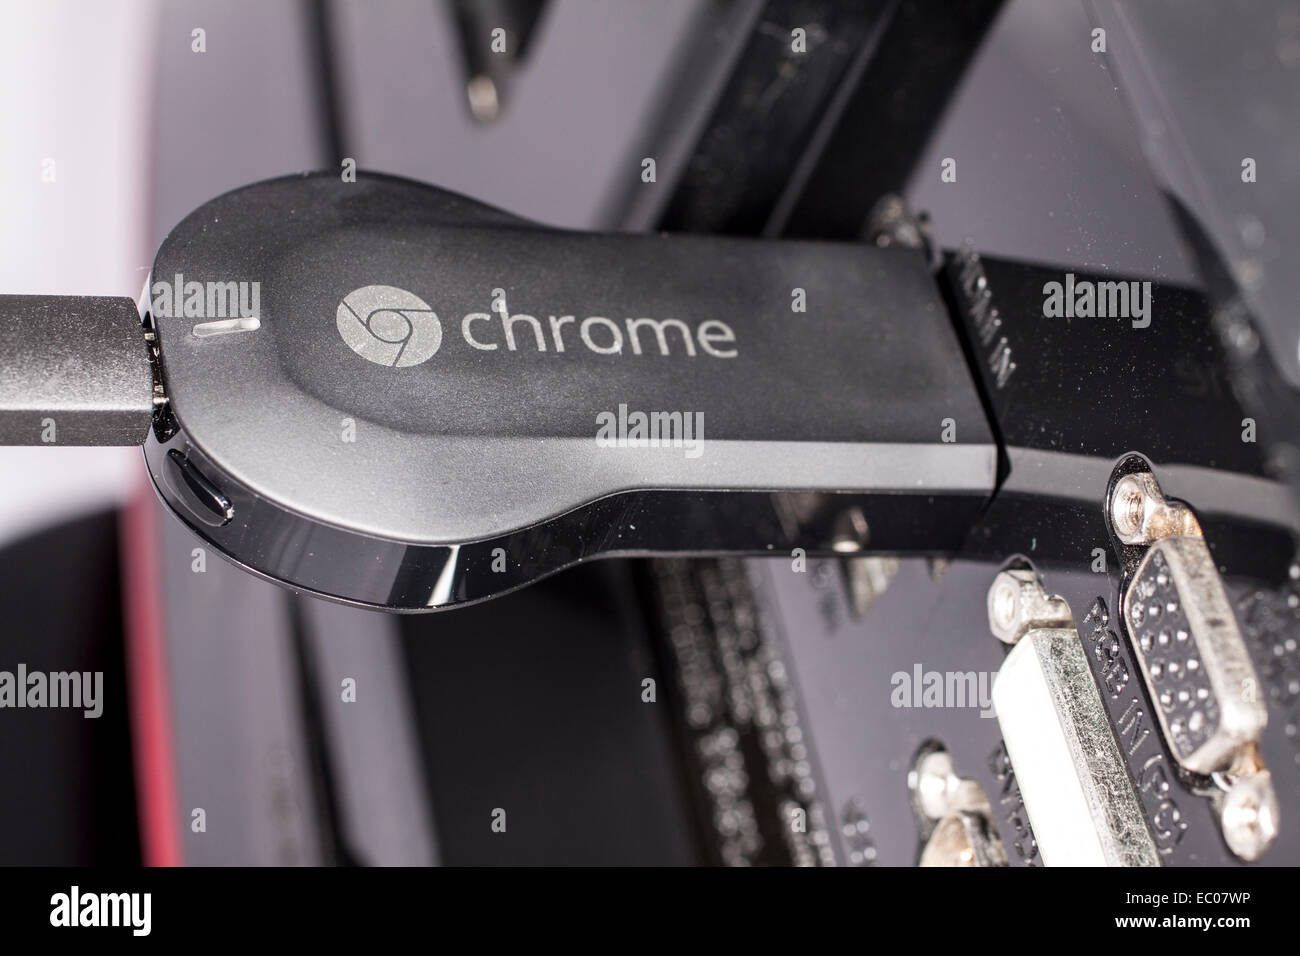 Google chromecast media streaming device plugged into the HDMI port of a  television Stock Photo - Alamy